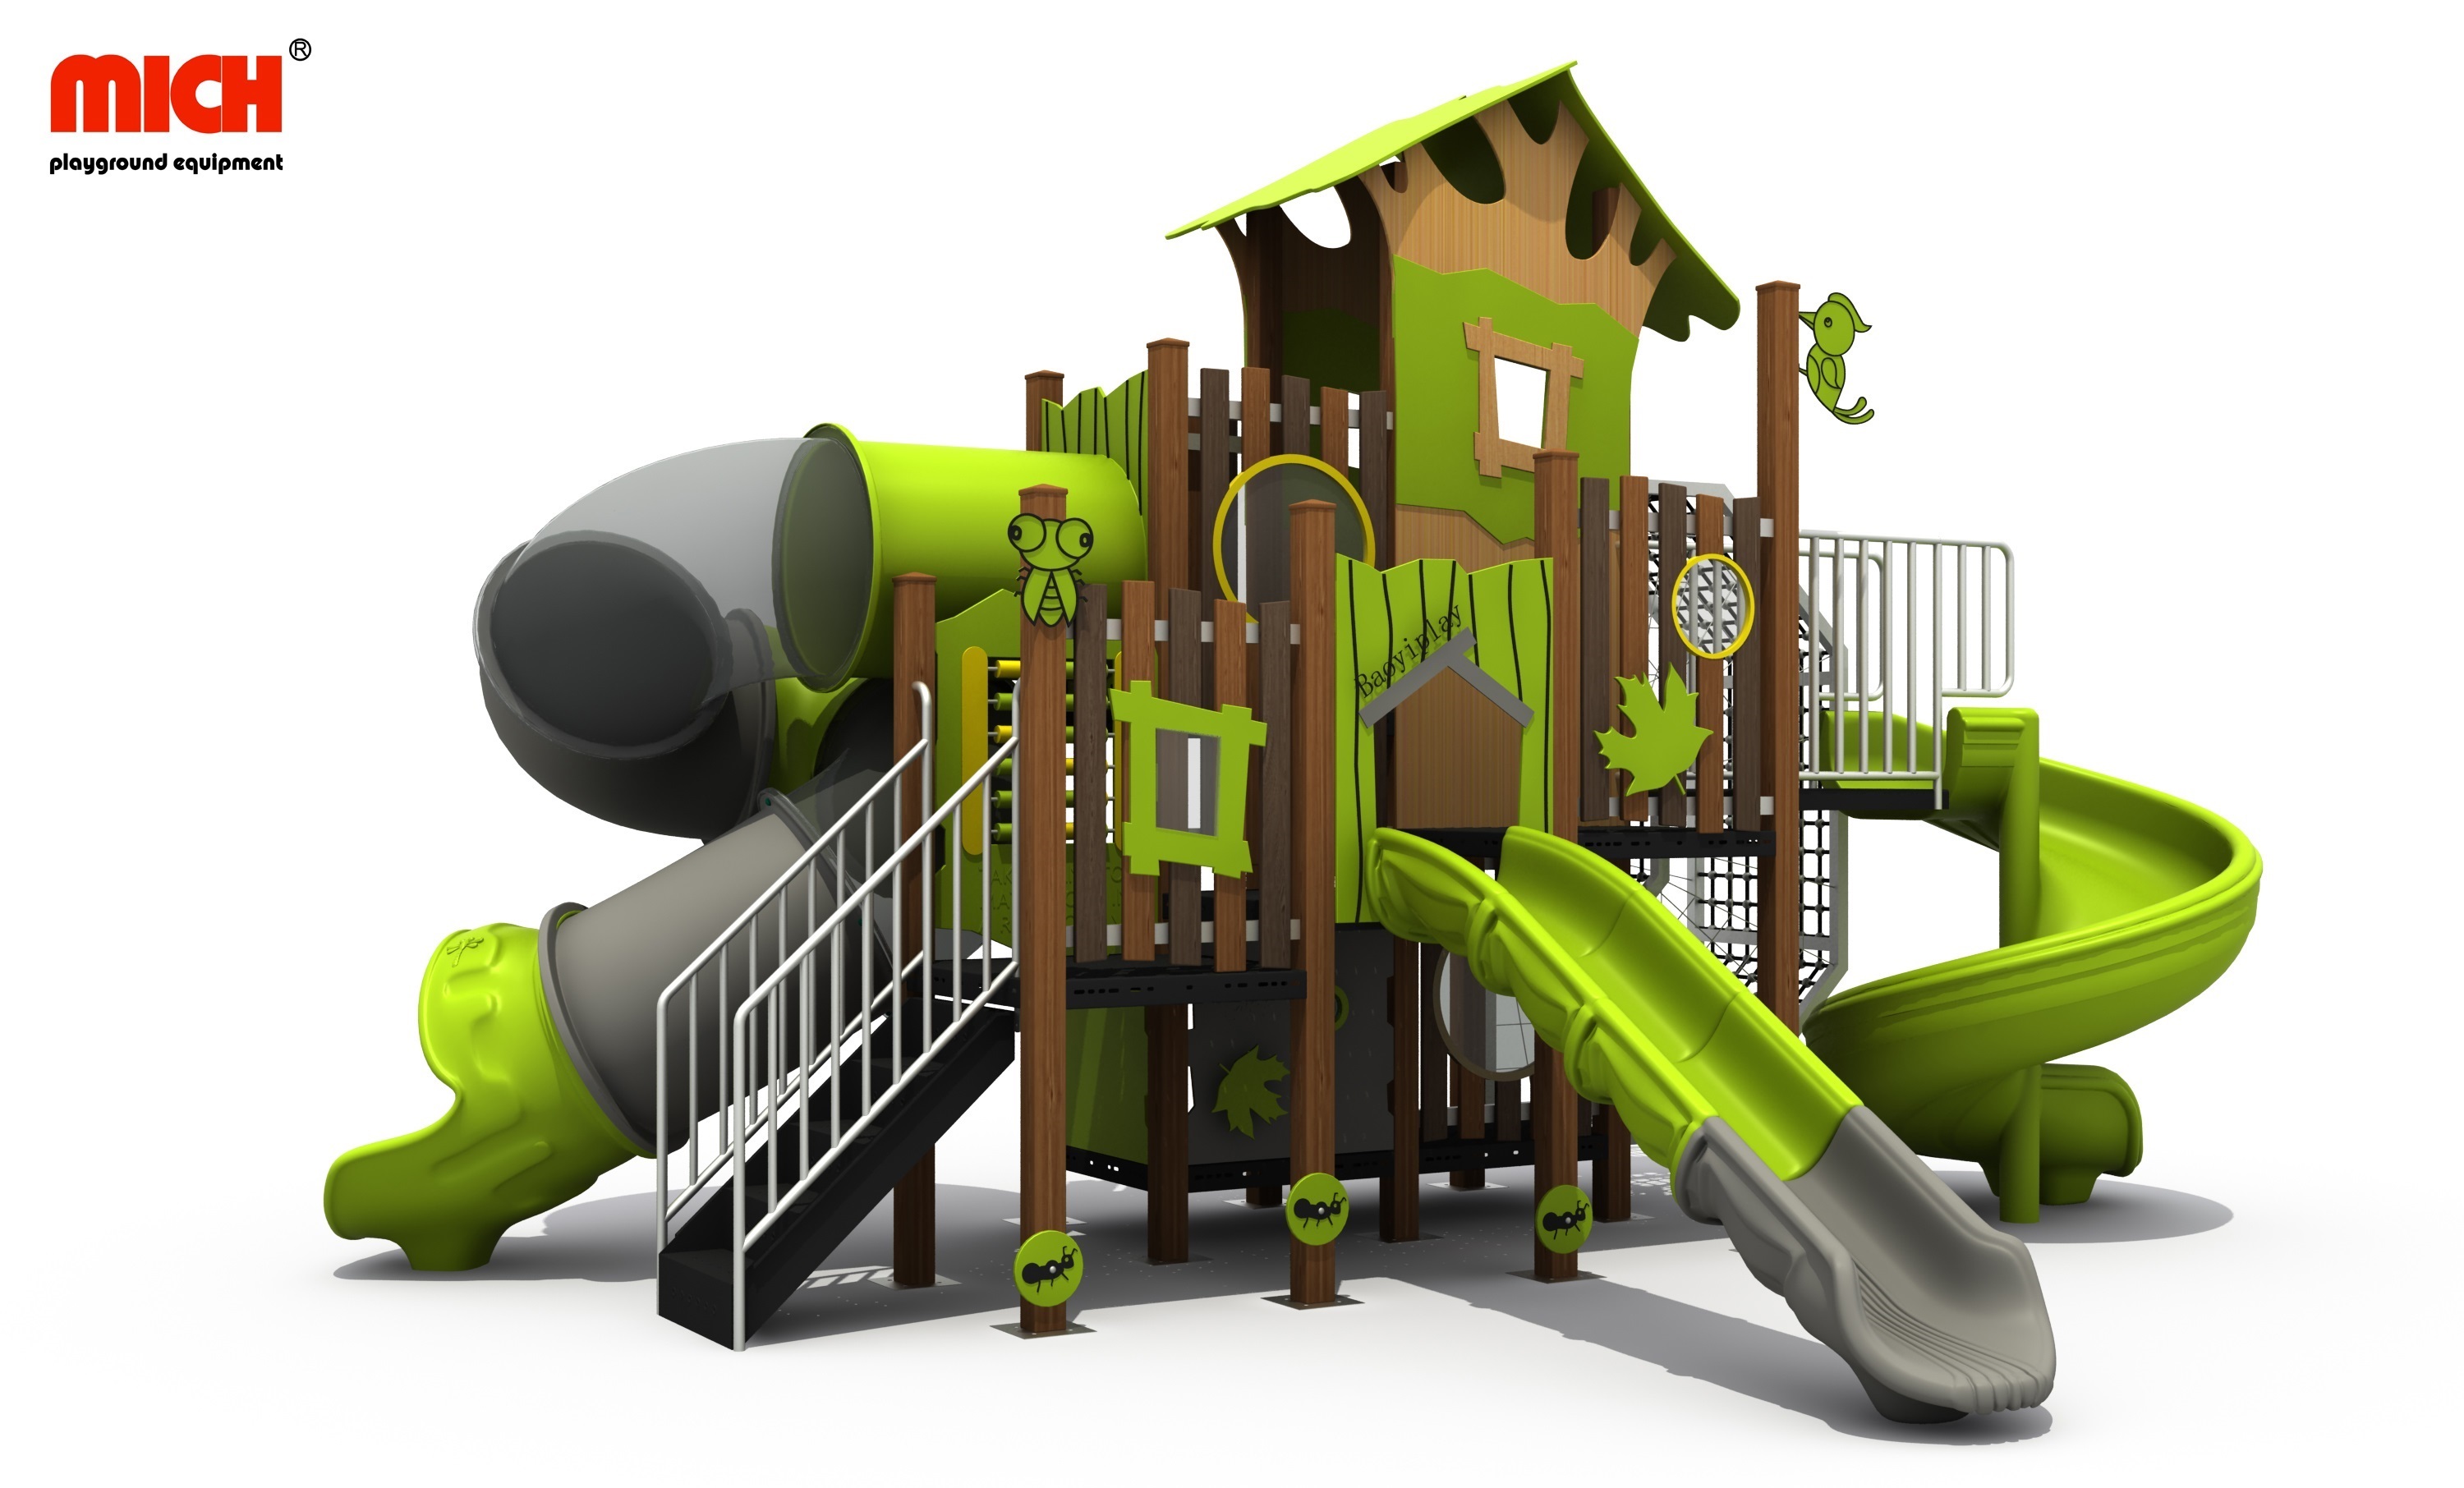 What is high-quality outdoor playground equipment?